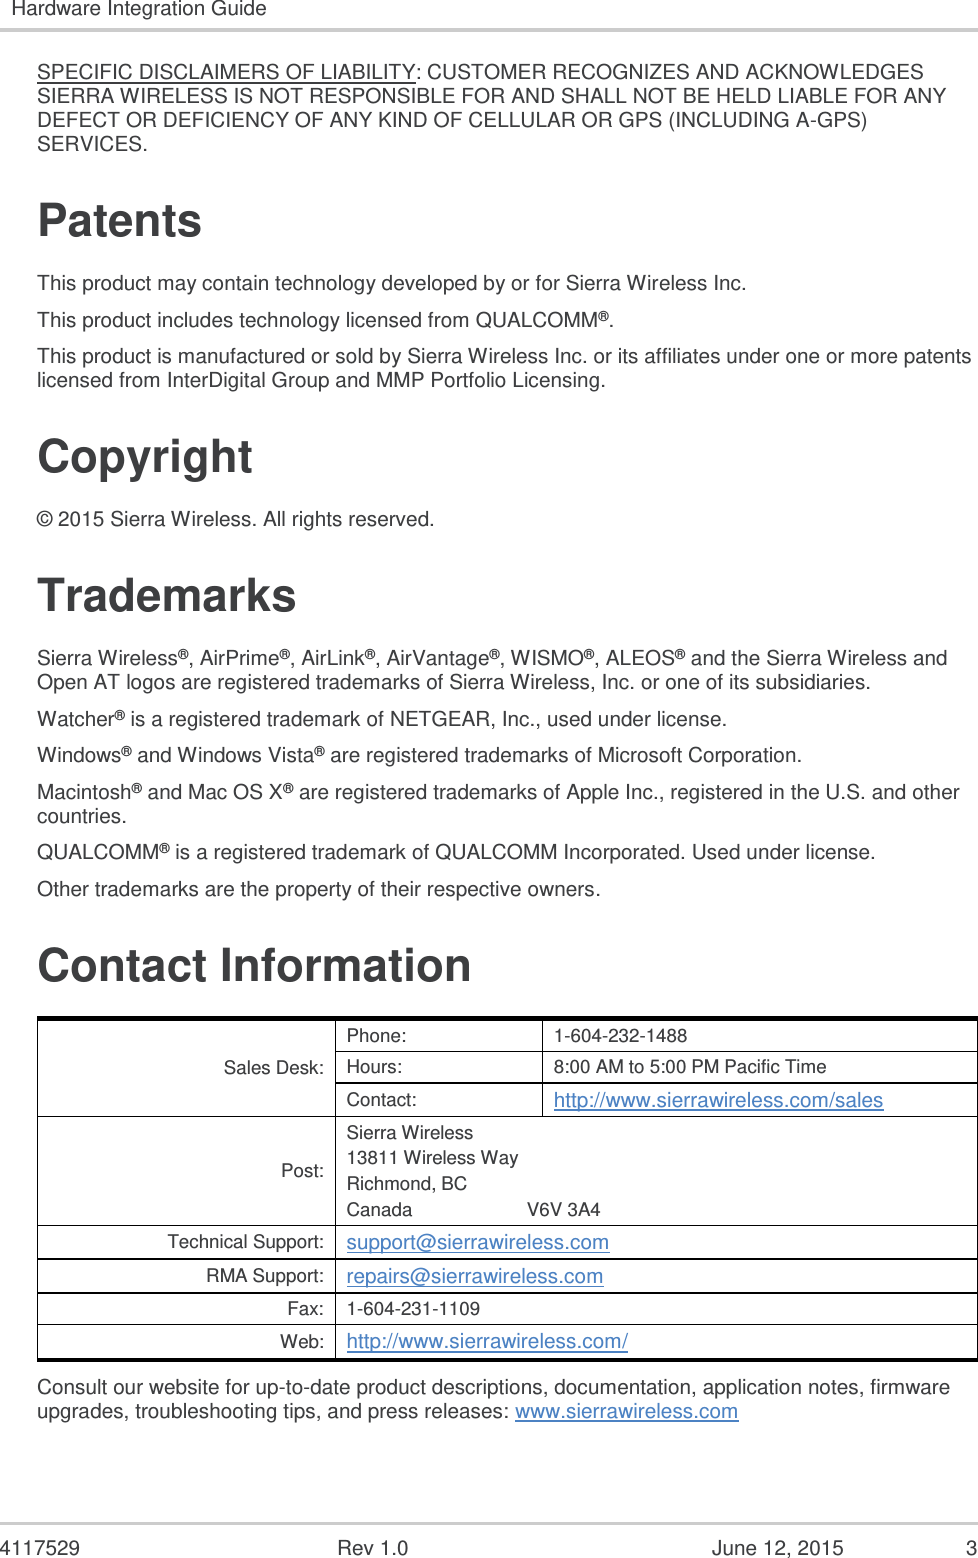   4117529  Rev 1.0  June 12, 2015  3 Hardware Integration Guide  SPECIFIC DISCLAIMERS OF LIABILITY: CUSTOMER RECOGNIZES AND ACKNOWLEDGES SIERRA WIRELESS IS NOT RESPONSIBLE FOR AND SHALL NOT BE HELD LIABLE FOR ANY DEFECT OR DEFICIENCY OF ANY KIND OF CELLULAR OR GPS (INCLUDING A-GPS) SERVICES. Patents This product may contain technology developed by or for Sierra Wireless Inc. This product includes technology licensed from QUALCOMM®. This product is manufactured or sold by Sierra Wireless Inc. or its affiliates under one or more patents licensed from InterDigital Group and MMP Portfolio Licensing. Copyright © 2015 Sierra Wireless. All rights reserved. Trademarks Sierra Wireless®, AirPrime®, AirLink®, AirVantage®, WISMO®, ALEOS® and the Sierra Wireless and Open AT logos are registered trademarks of Sierra Wireless, Inc. or one of its subsidiaries. Watcher® is a registered trademark of NETGEAR, Inc., used under license. Windows® and Windows Vista® are registered trademarks of Microsoft Corporation. Macintosh® and Mac OS X® are registered trademarks of Apple Inc., registered in the U.S. and other countries. QUALCOMM® is a registered trademark of QUALCOMM Incorporated. Used under license. Other trademarks are the property of their respective owners. Contact Information Sales Desk: Phone: 1-604-232-1488 Hours: 8:00 AM to 5:00 PM Pacific Time Contact: http://www.sierrawireless.com/sales Post: Sierra Wireless 13811 Wireless Way Richmond, BC Canada                      V6V 3A4 Technical Support: support@sierrawireless.com RMA Support: repairs@sierrawireless.com Fax: 1-604-231-1109 Web: http://www.sierrawireless.com/ Consult our website for up-to-date product descriptions, documentation, application notes, firmware upgrades, troubleshooting tips, and press releases: www.sierrawireless.com   